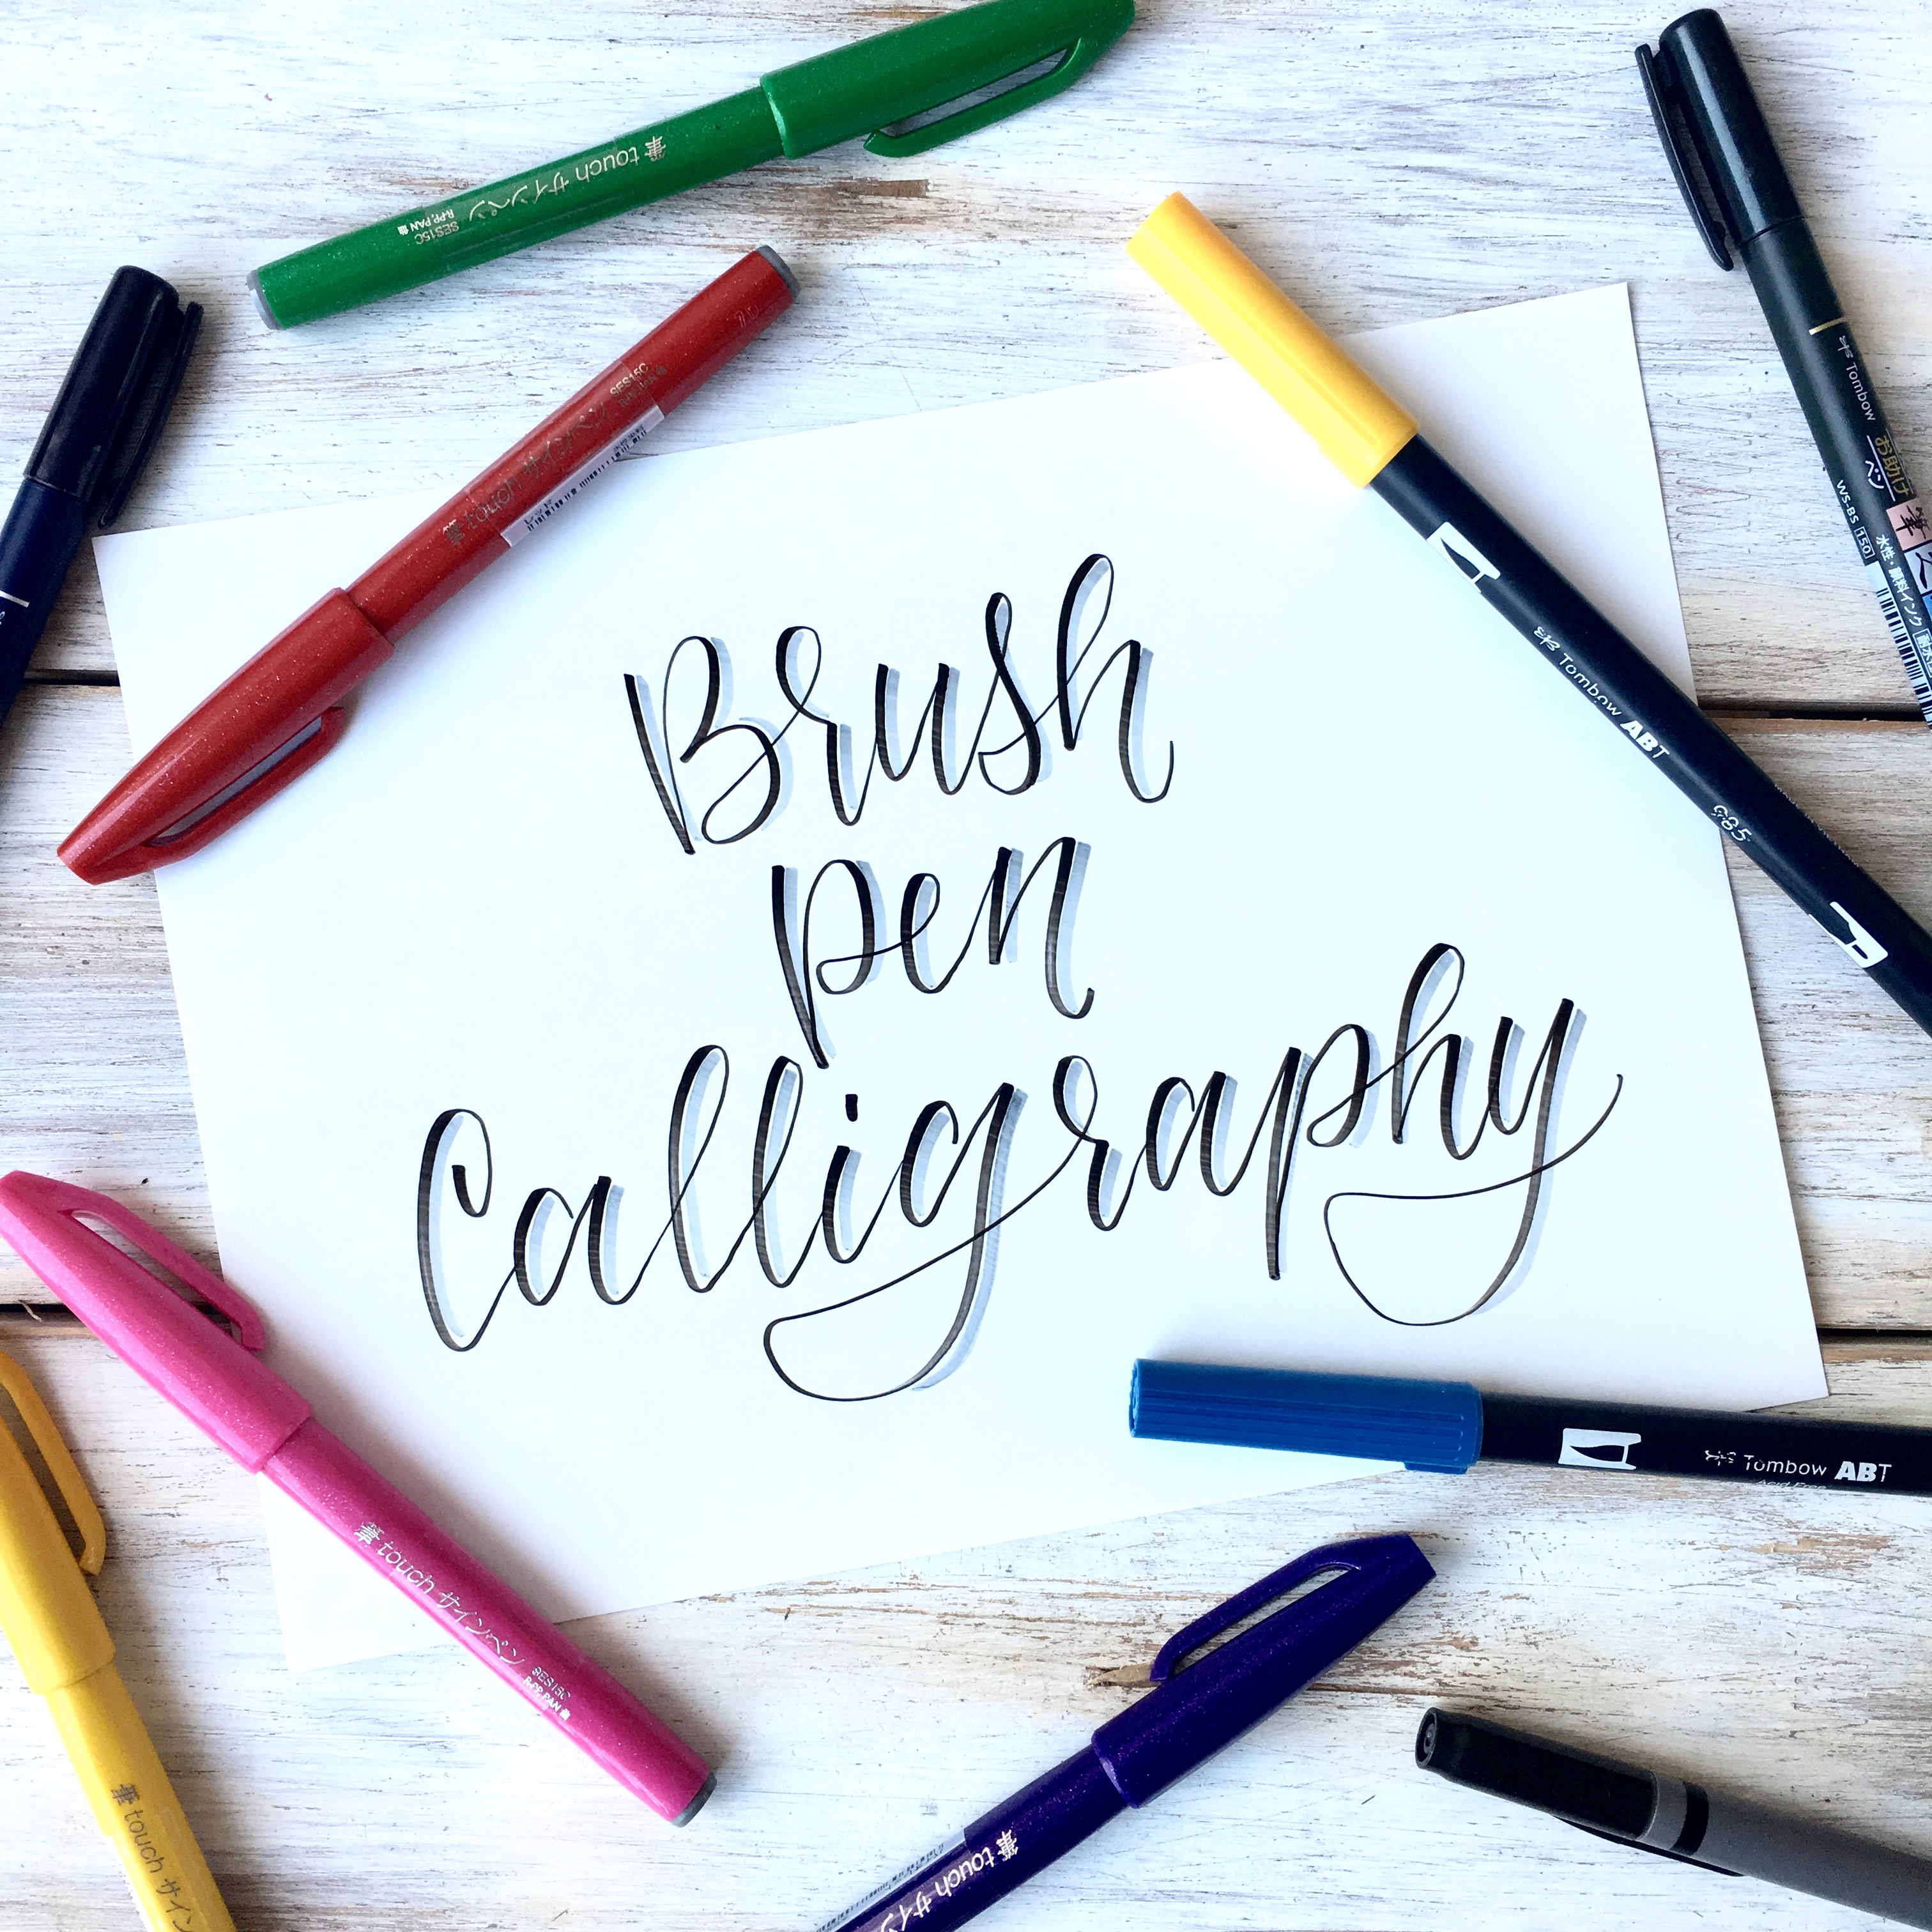 How to do brush pen calligraphy for beginners. Including free brush pen calligraphy practice sheets